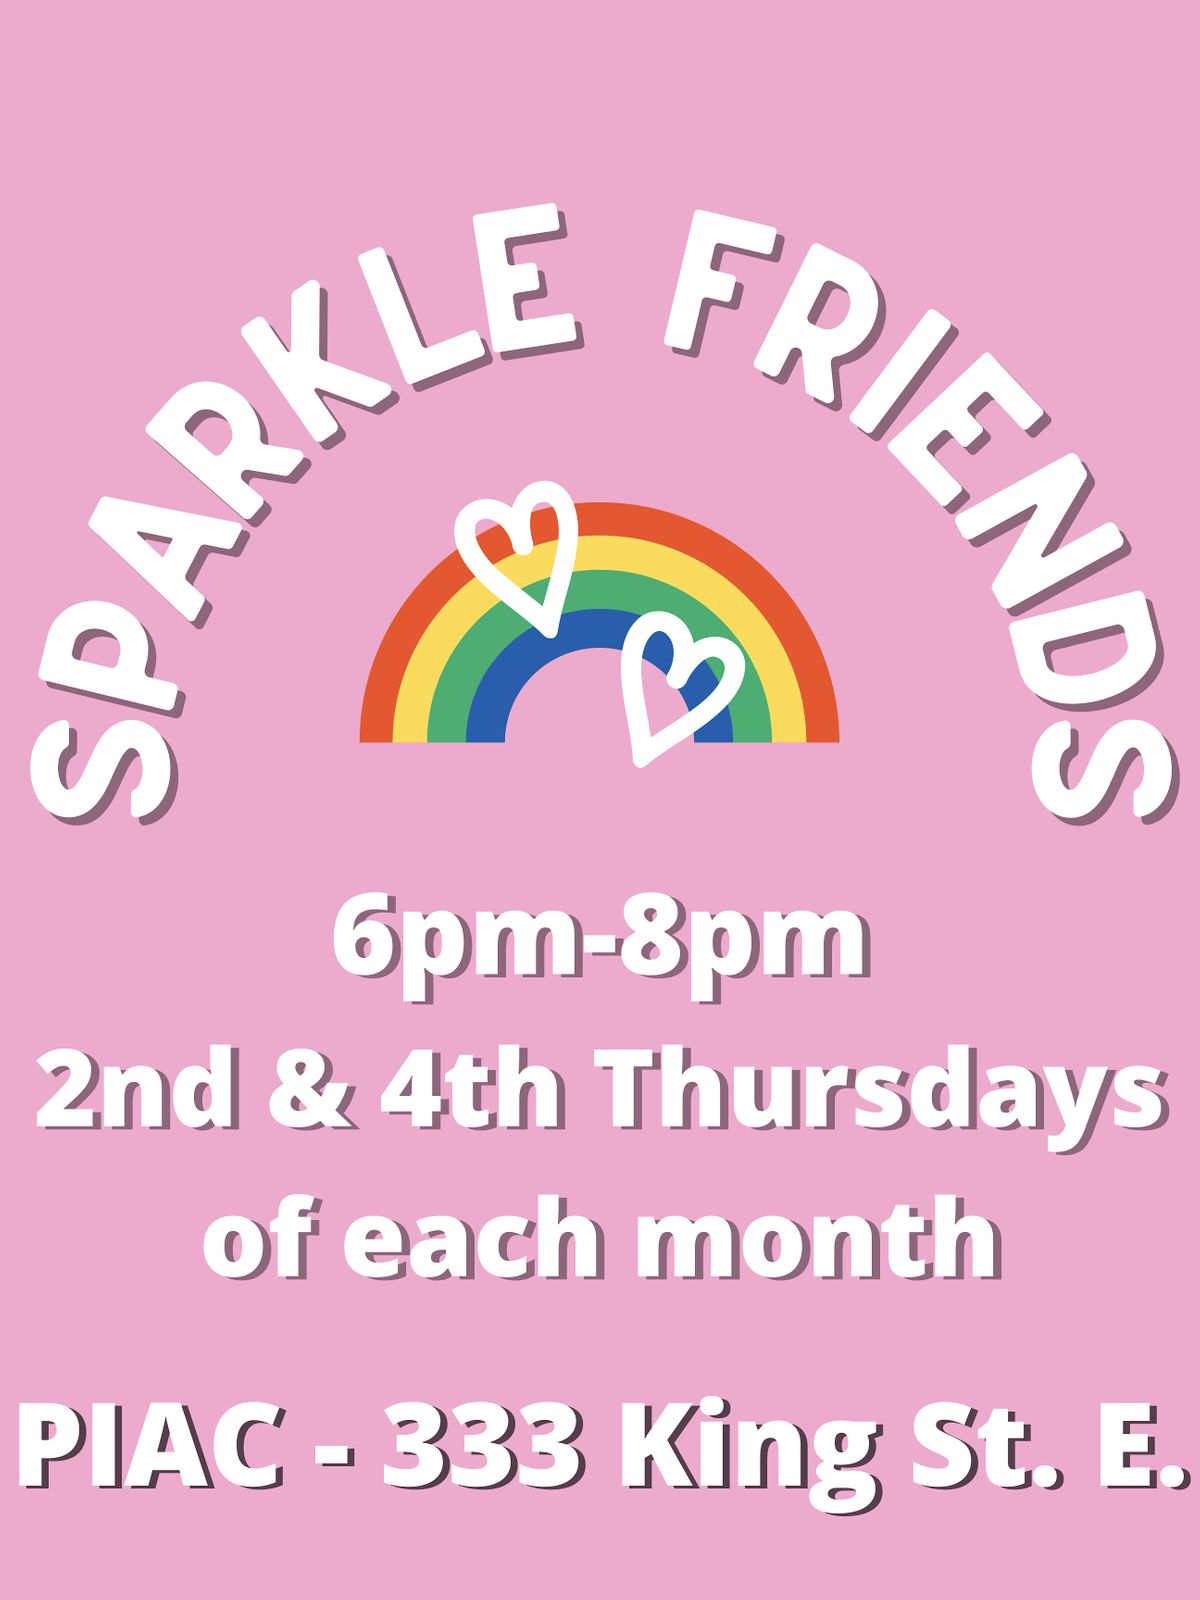 Sparkle Friends Peer Support Group